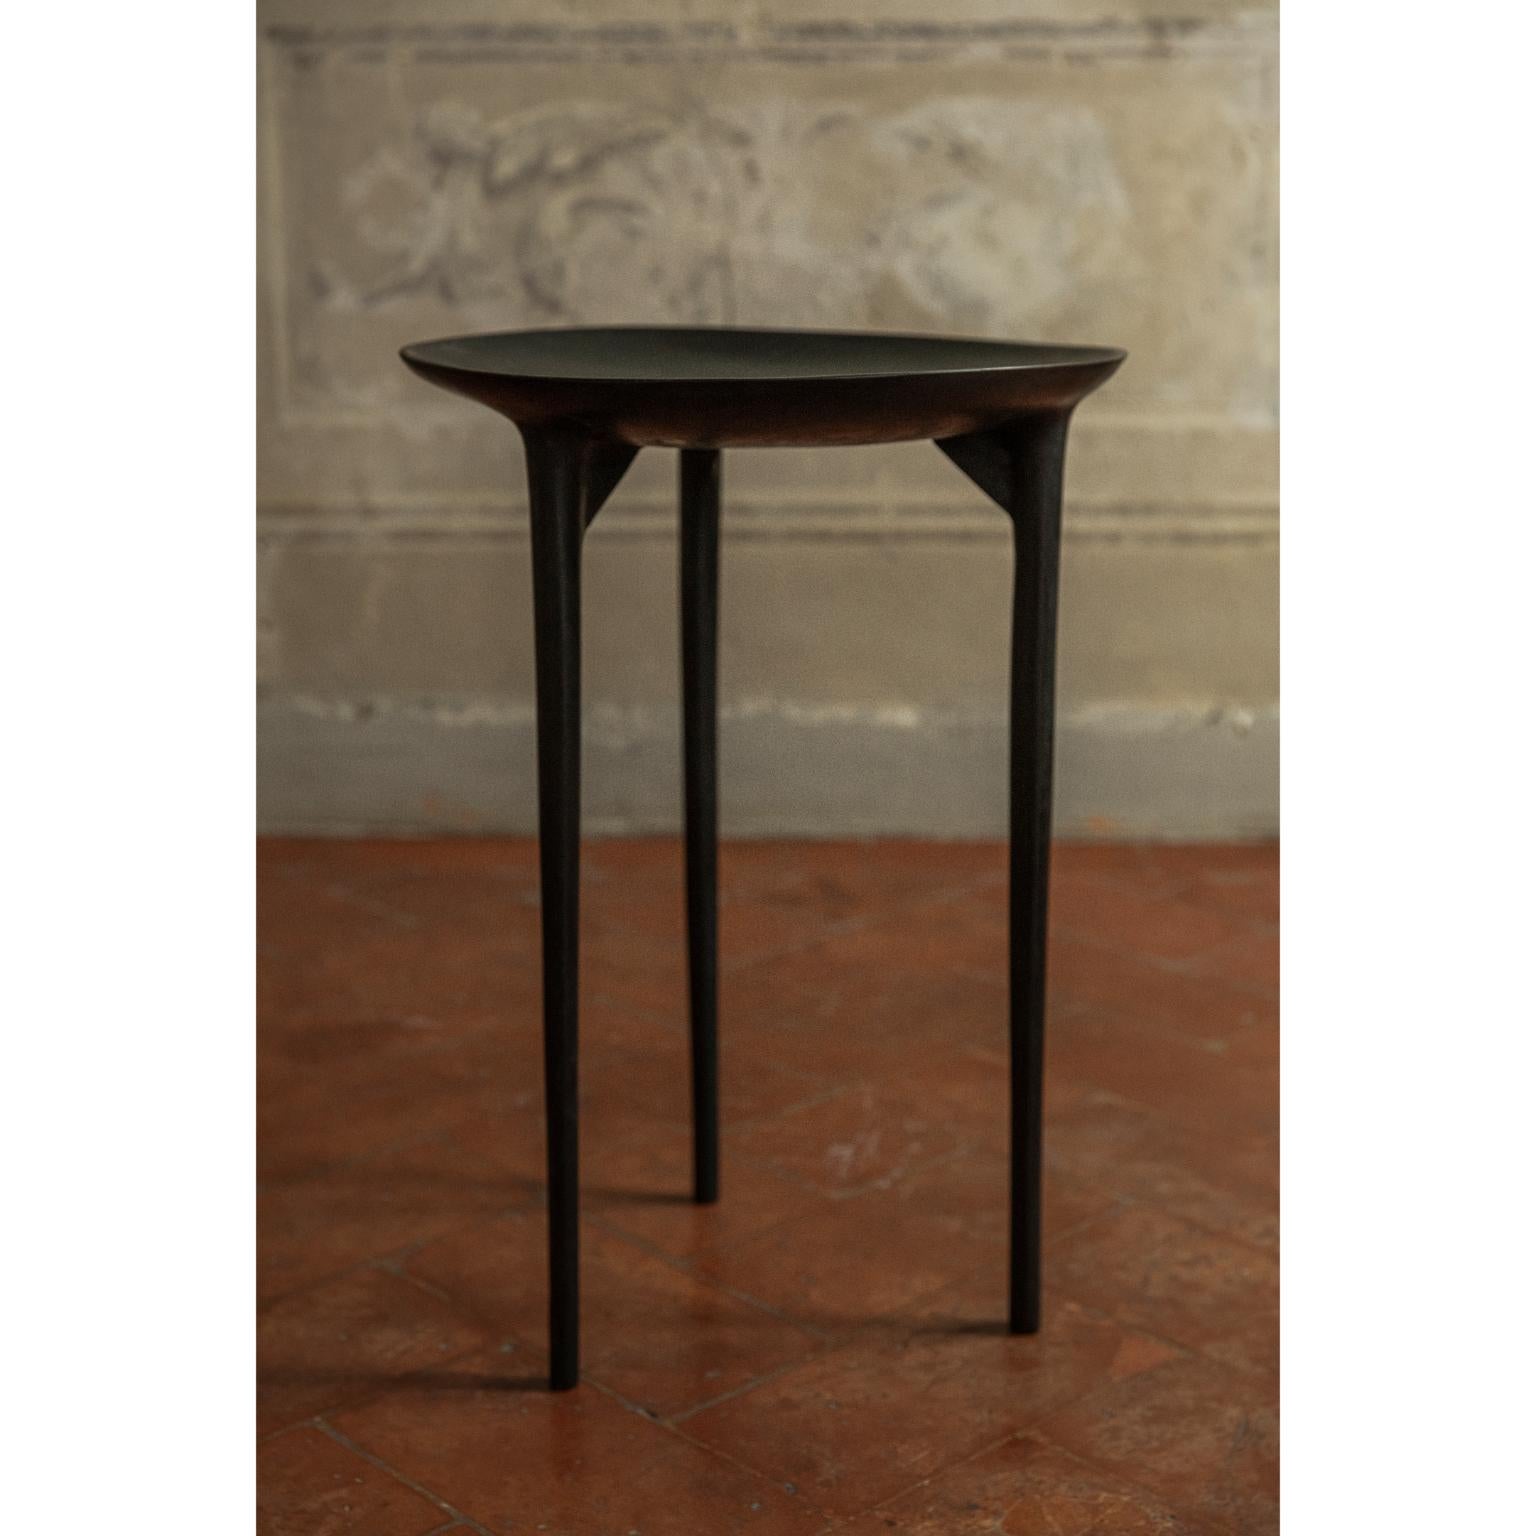 Tall brazier table by Rick Owens
2007
Dimensions: L 42 x W 42 x H 59 cm.
Materials: Bronze
Weight: 25 kg

Available in black finish or nitrate (dark brown) finish.

Rick Owens is a California-born fashion and furniture has developed a unique